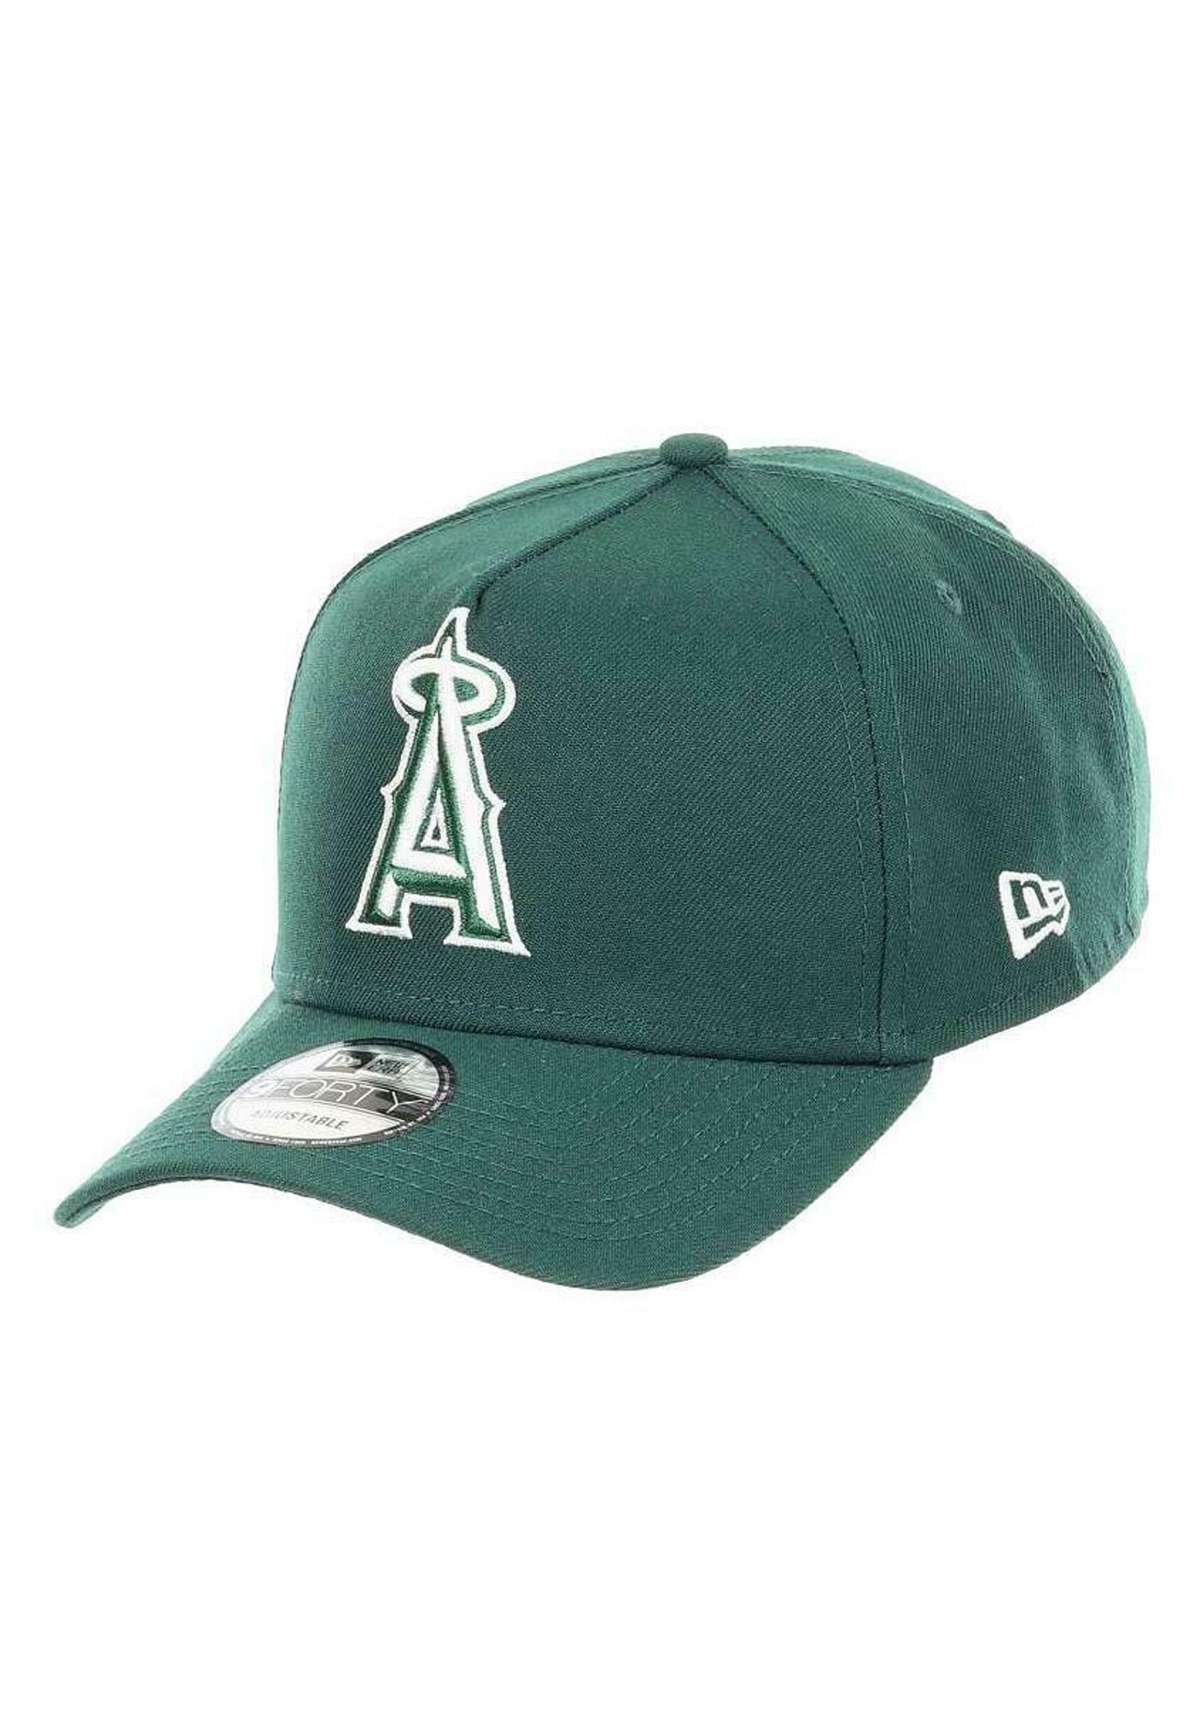 Кепка ANAHEIM ANGELS MLB ESSENTIAL 9FORTY A-FRAME SNAPBACK